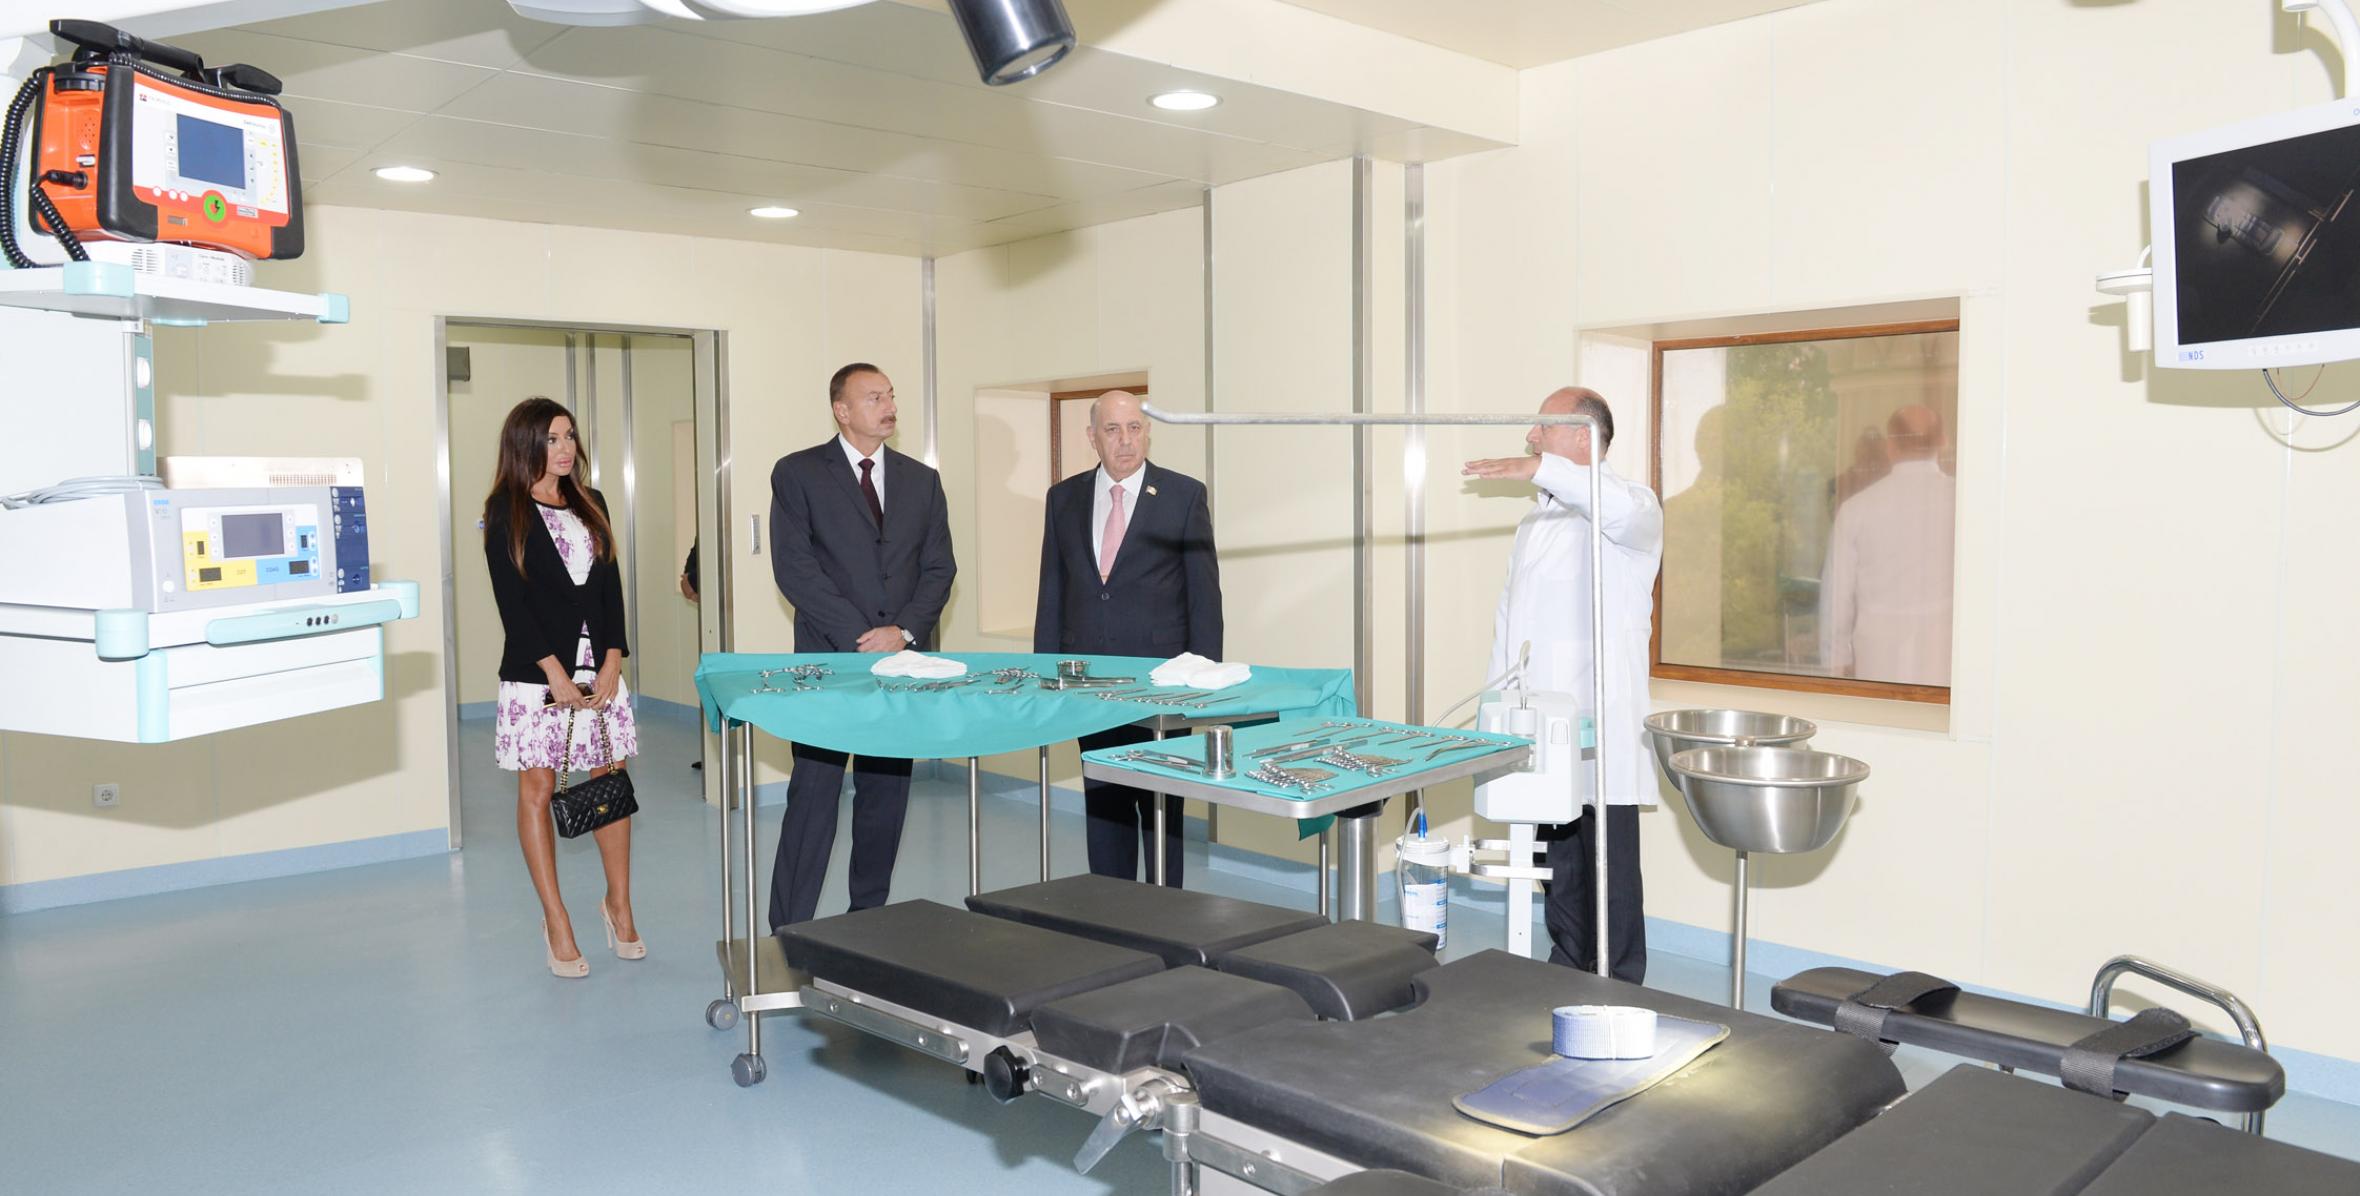 Ilham Aliyev attended the opening of a Training and Surgical Clinic of the Azerbaijan Medical University